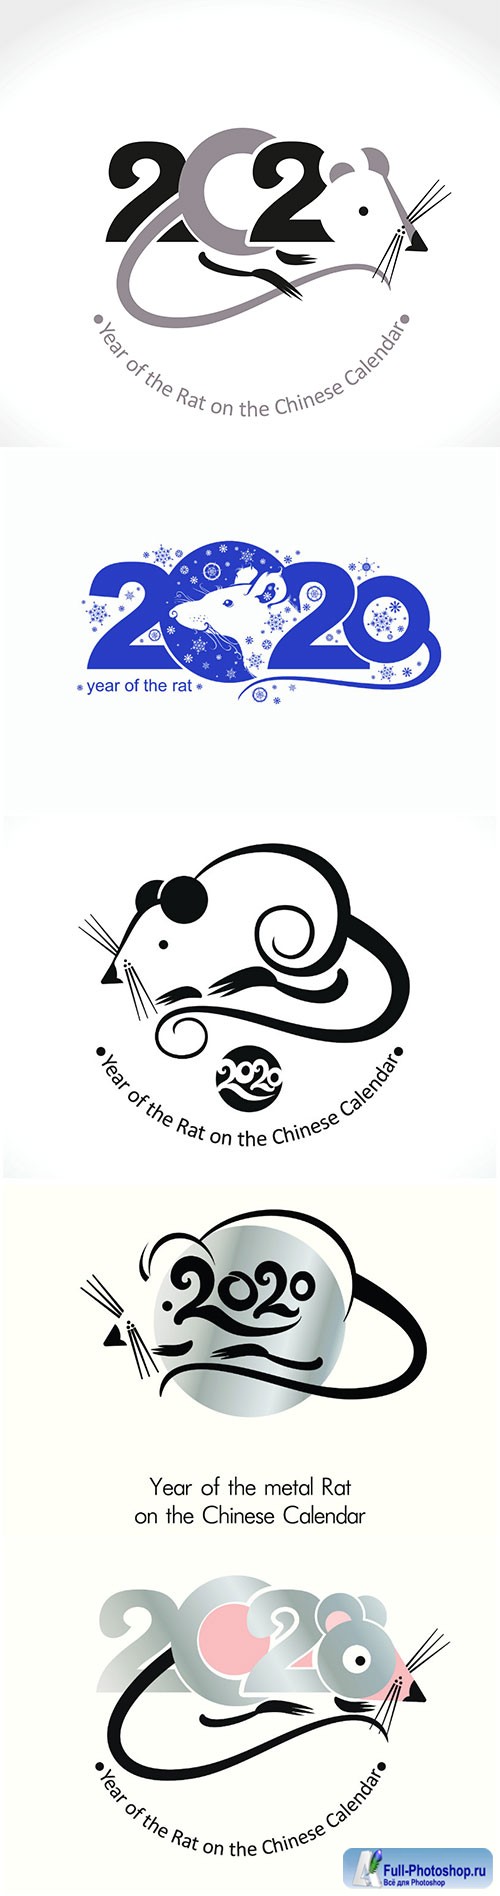 Year of the Rat 2020, vector template New Year's design on the Chinese calendar